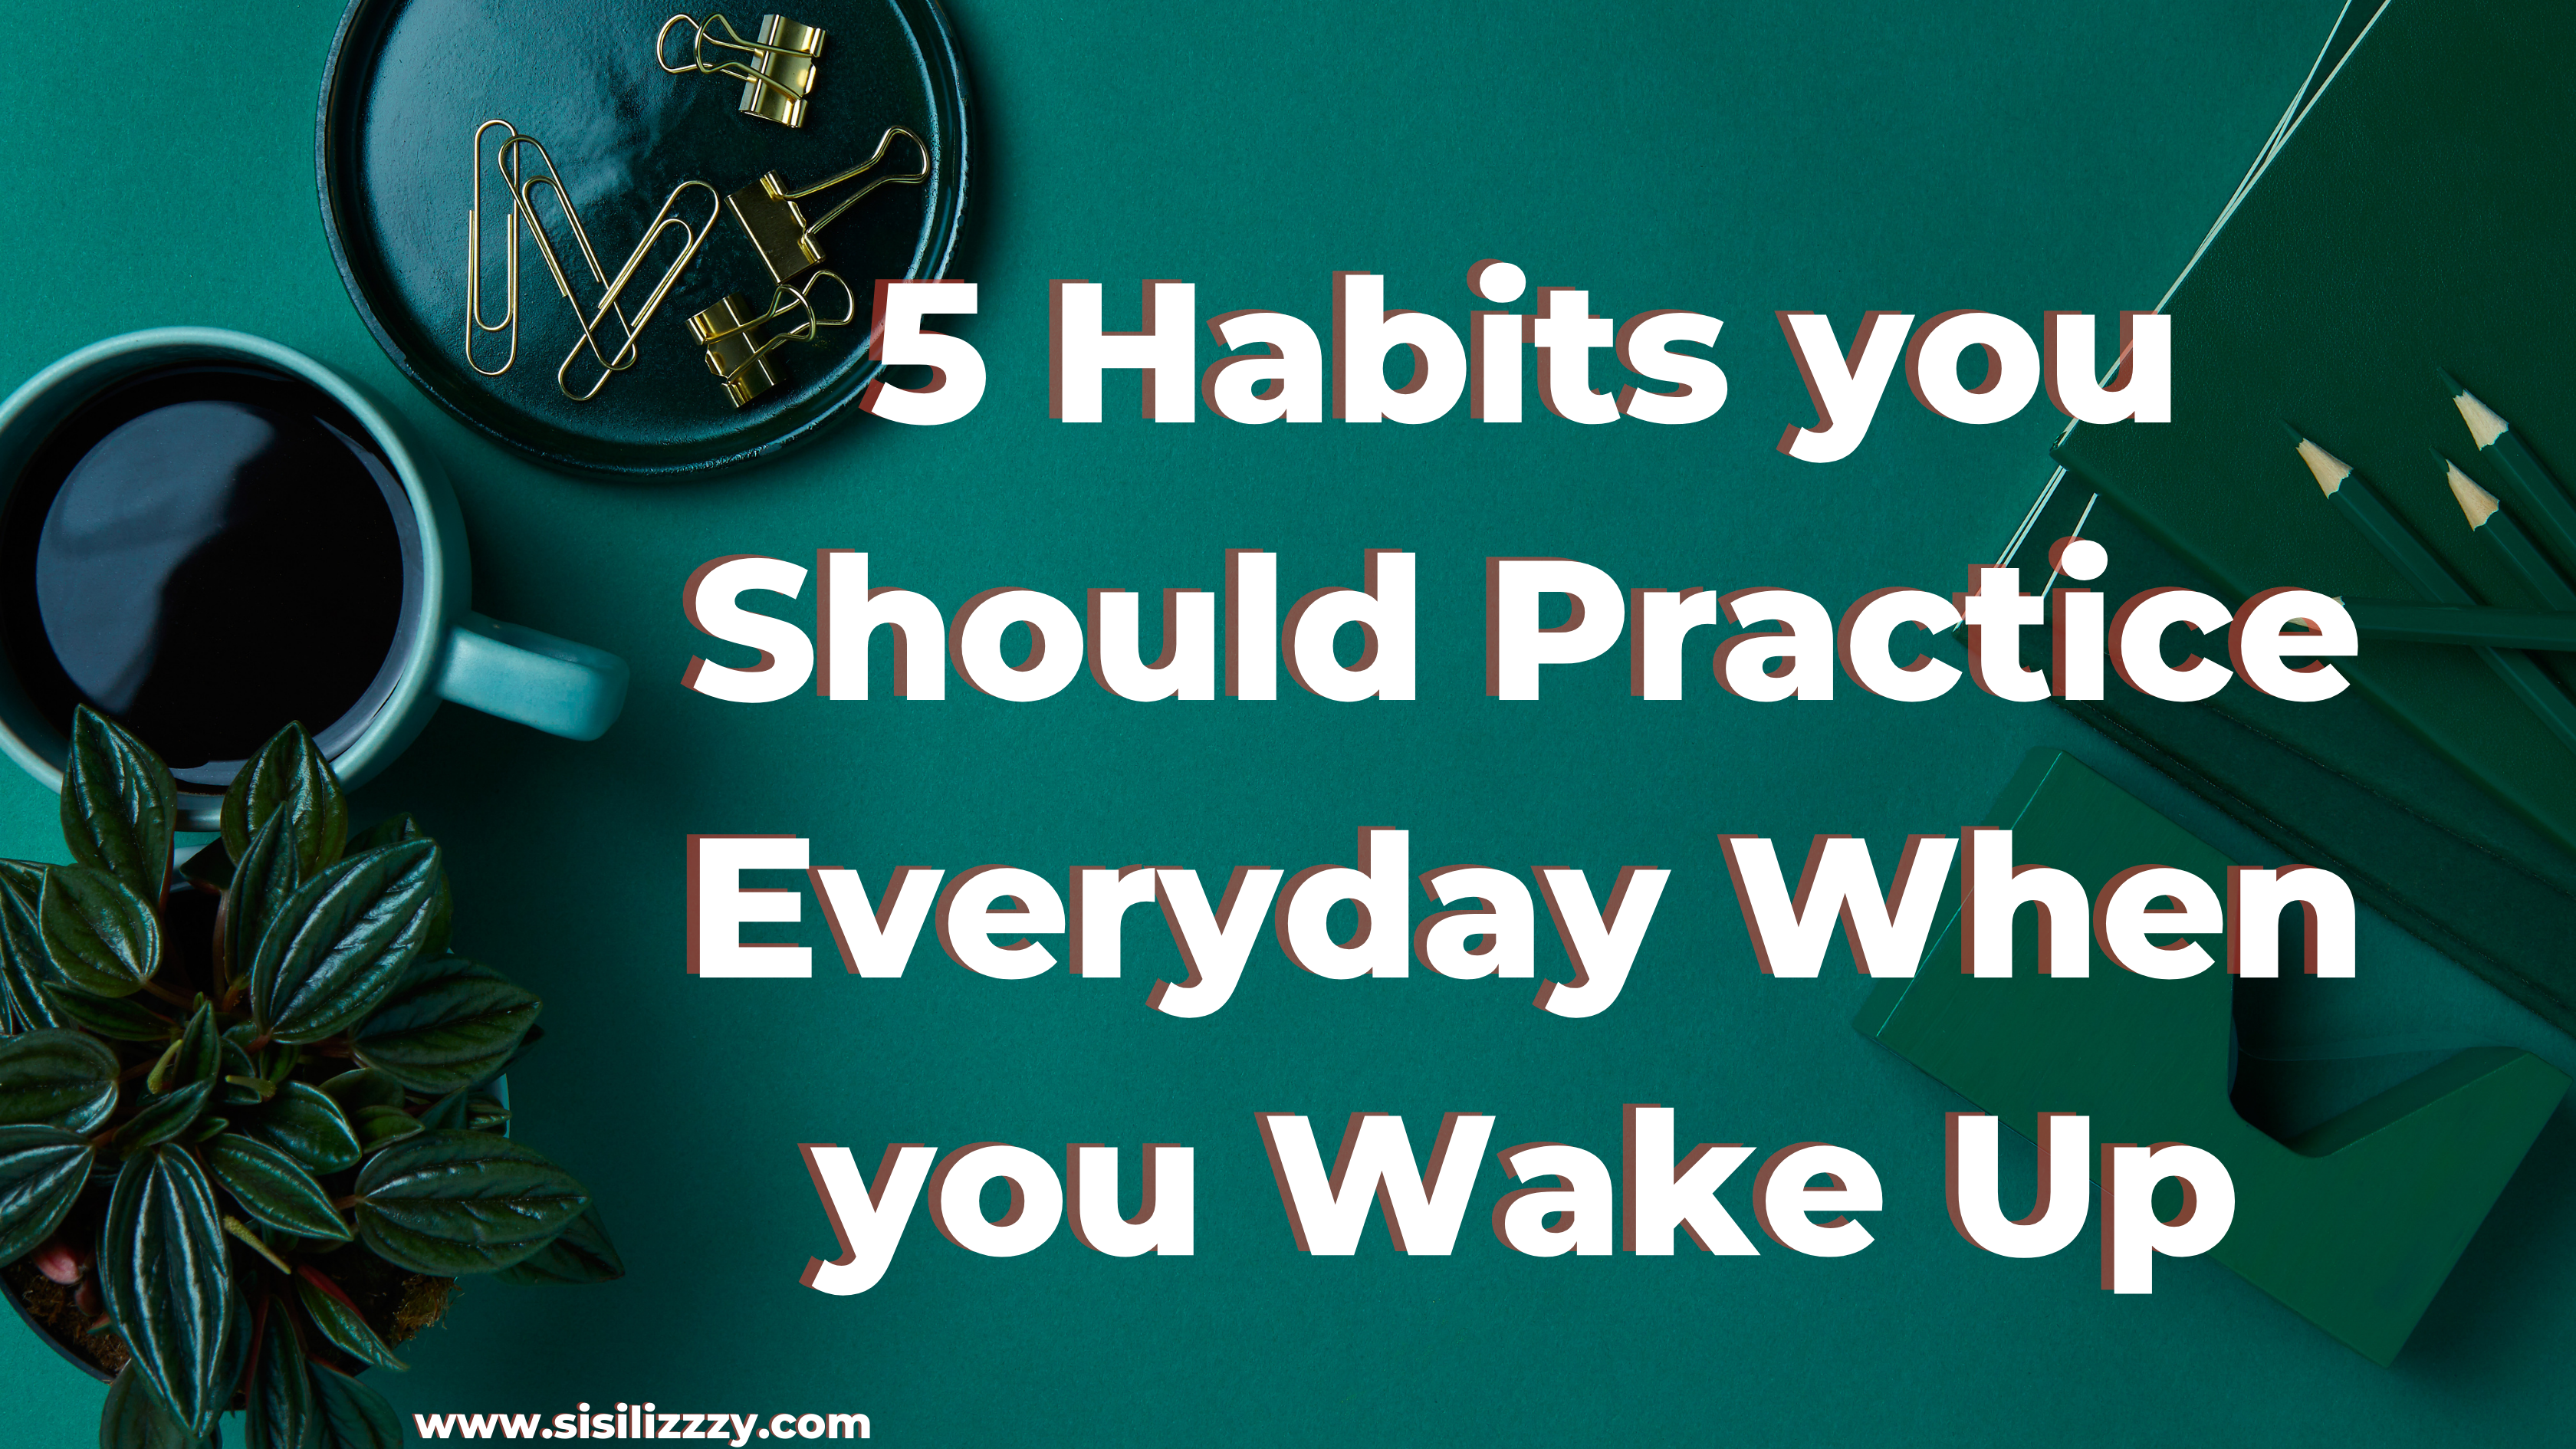 5 Habits you Should Practice Everyday When you Wake Up